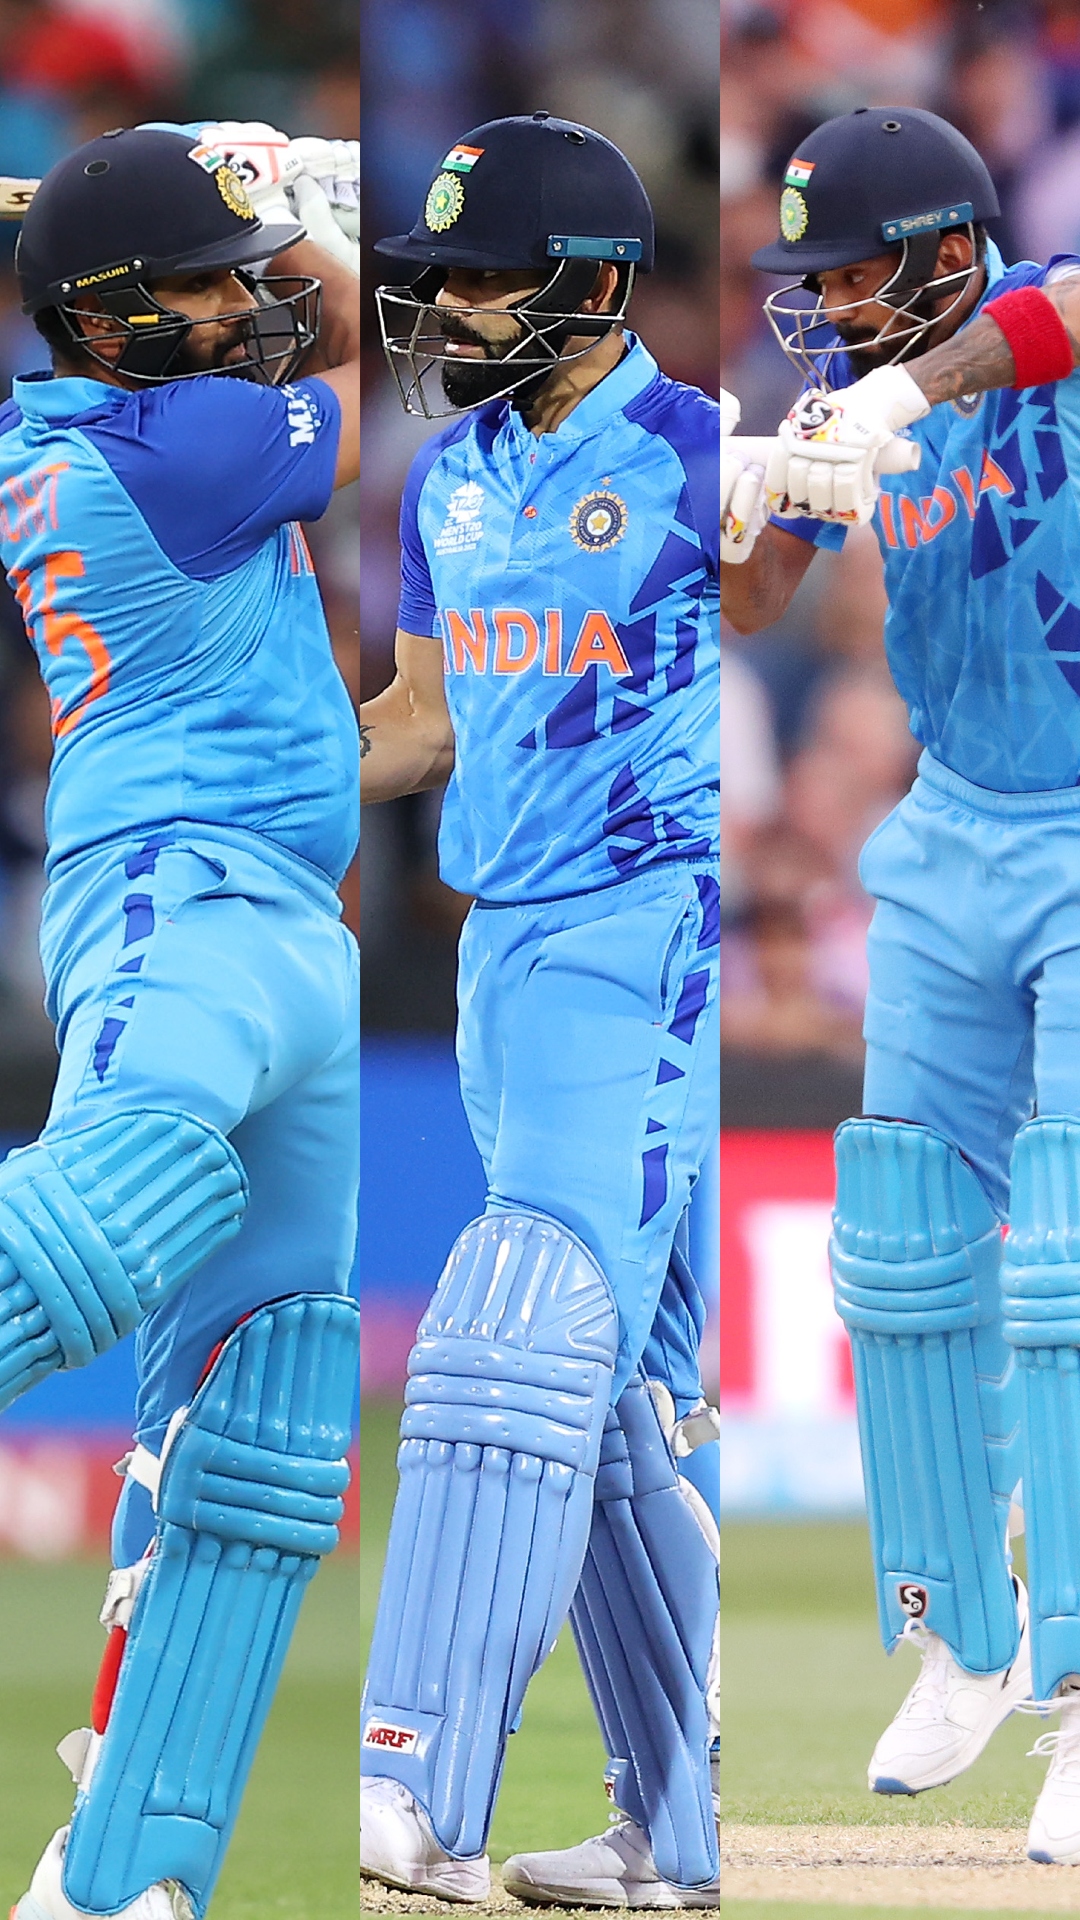 IND vs NZ 3rd ODI: Virat Kohli to Rohit Sharma, Indian batters with most ODI sixes in powerplay